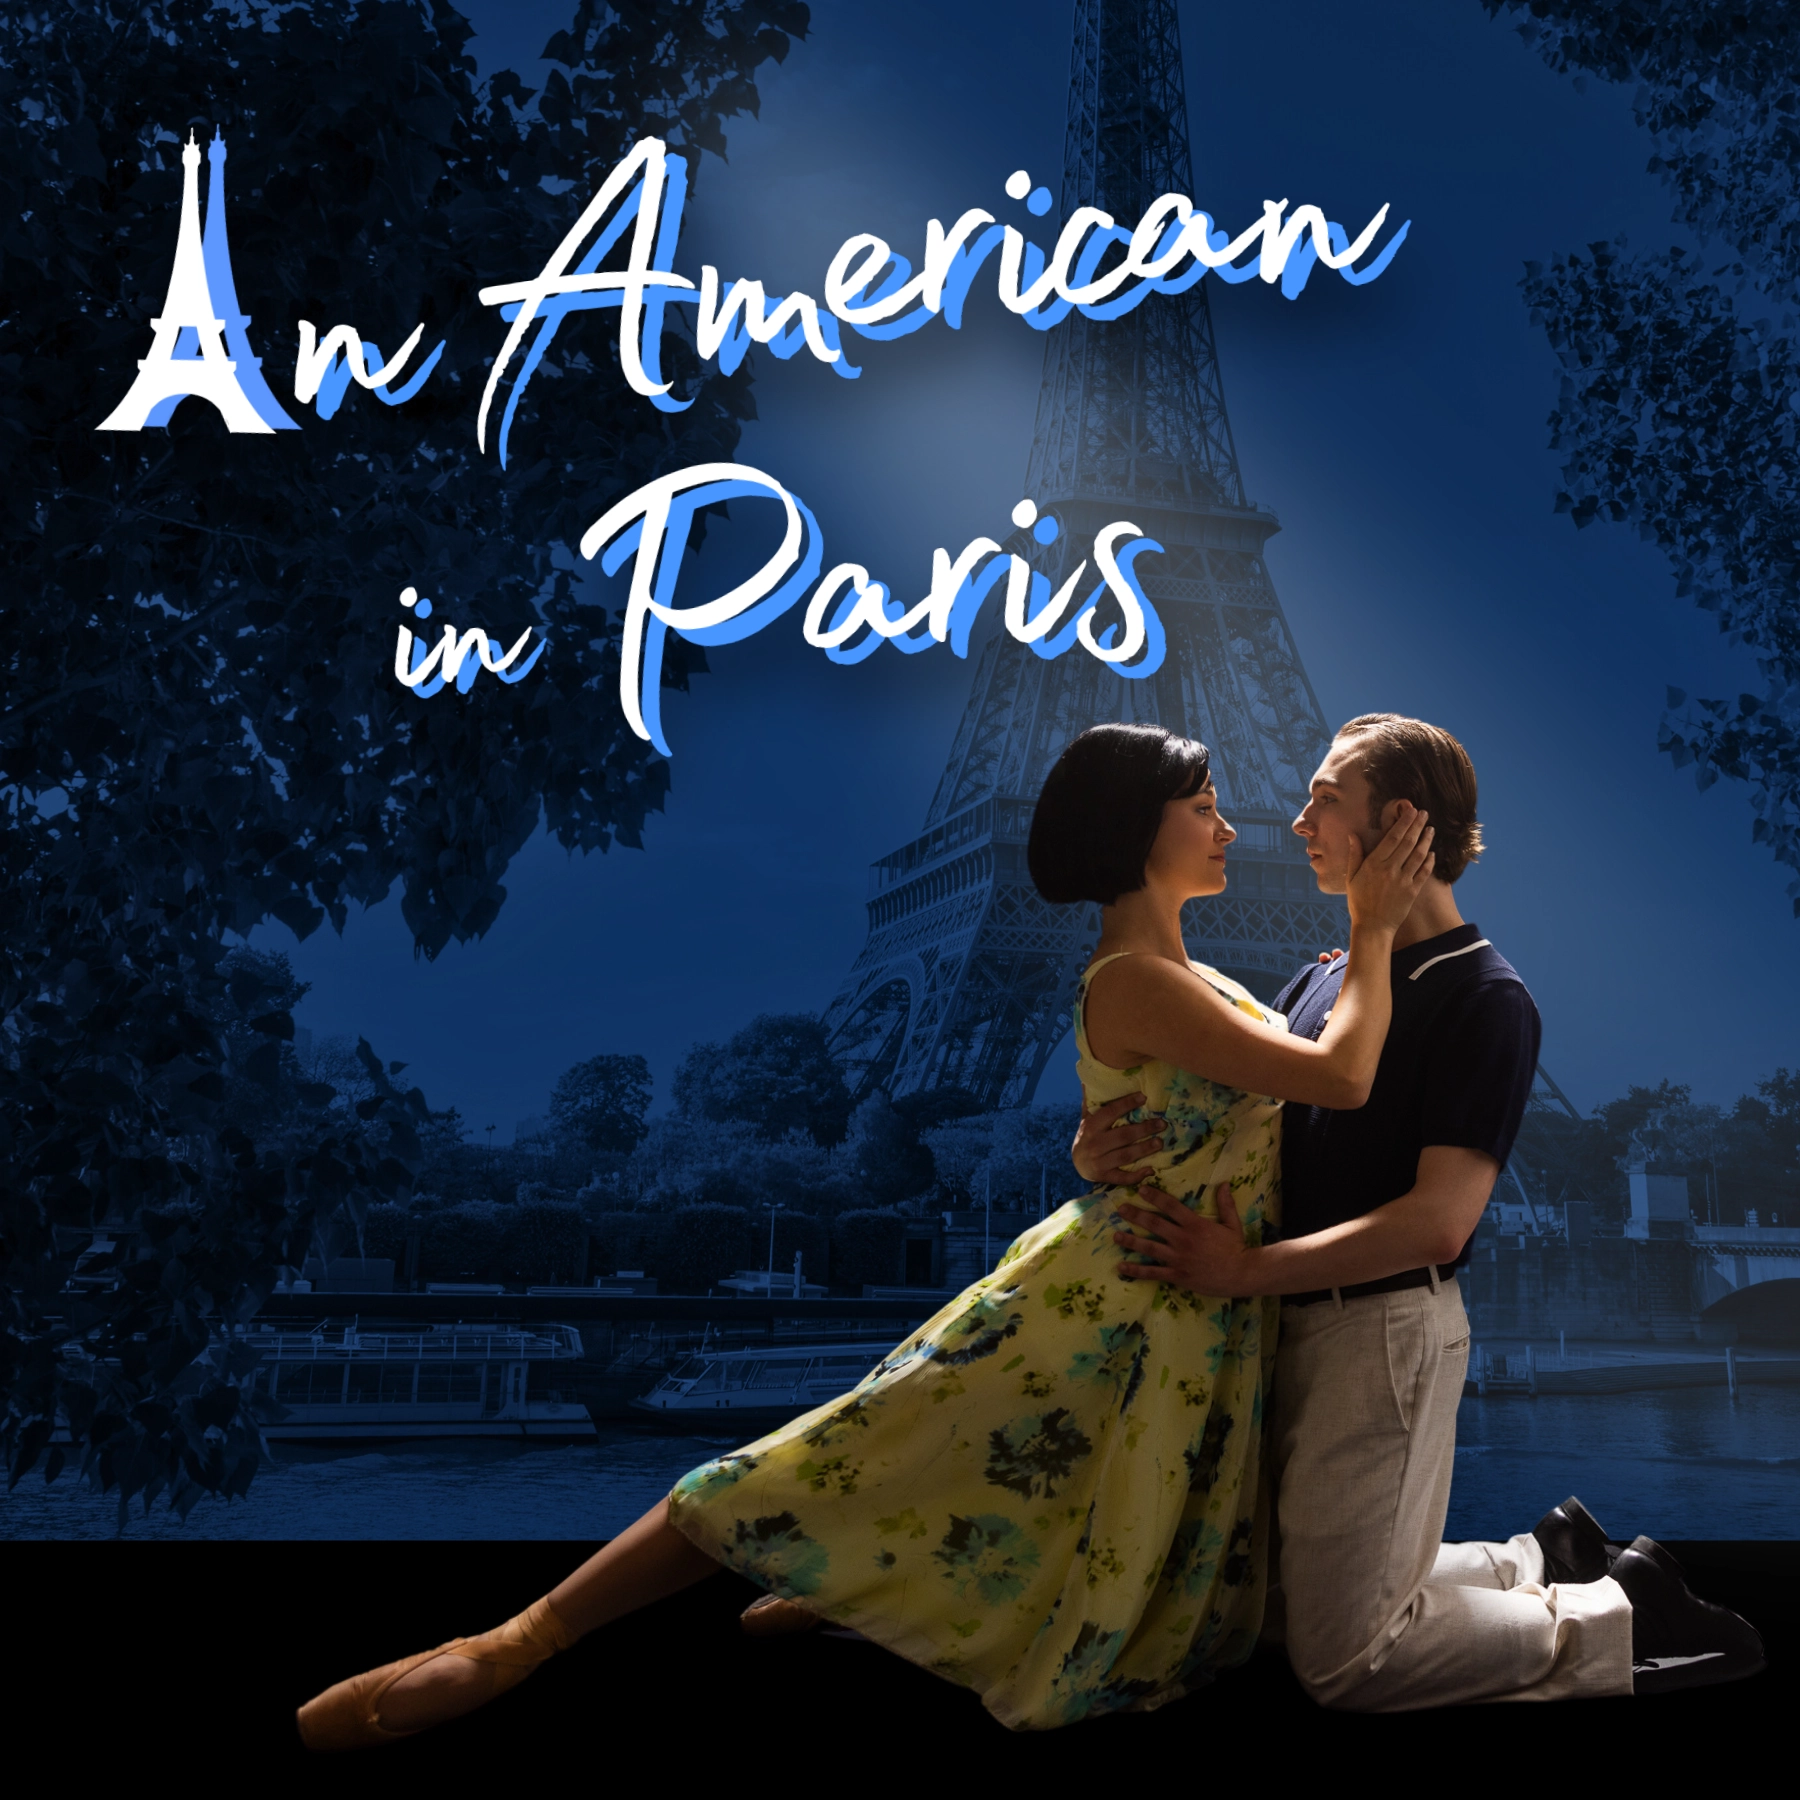 An American in Paris Show Image